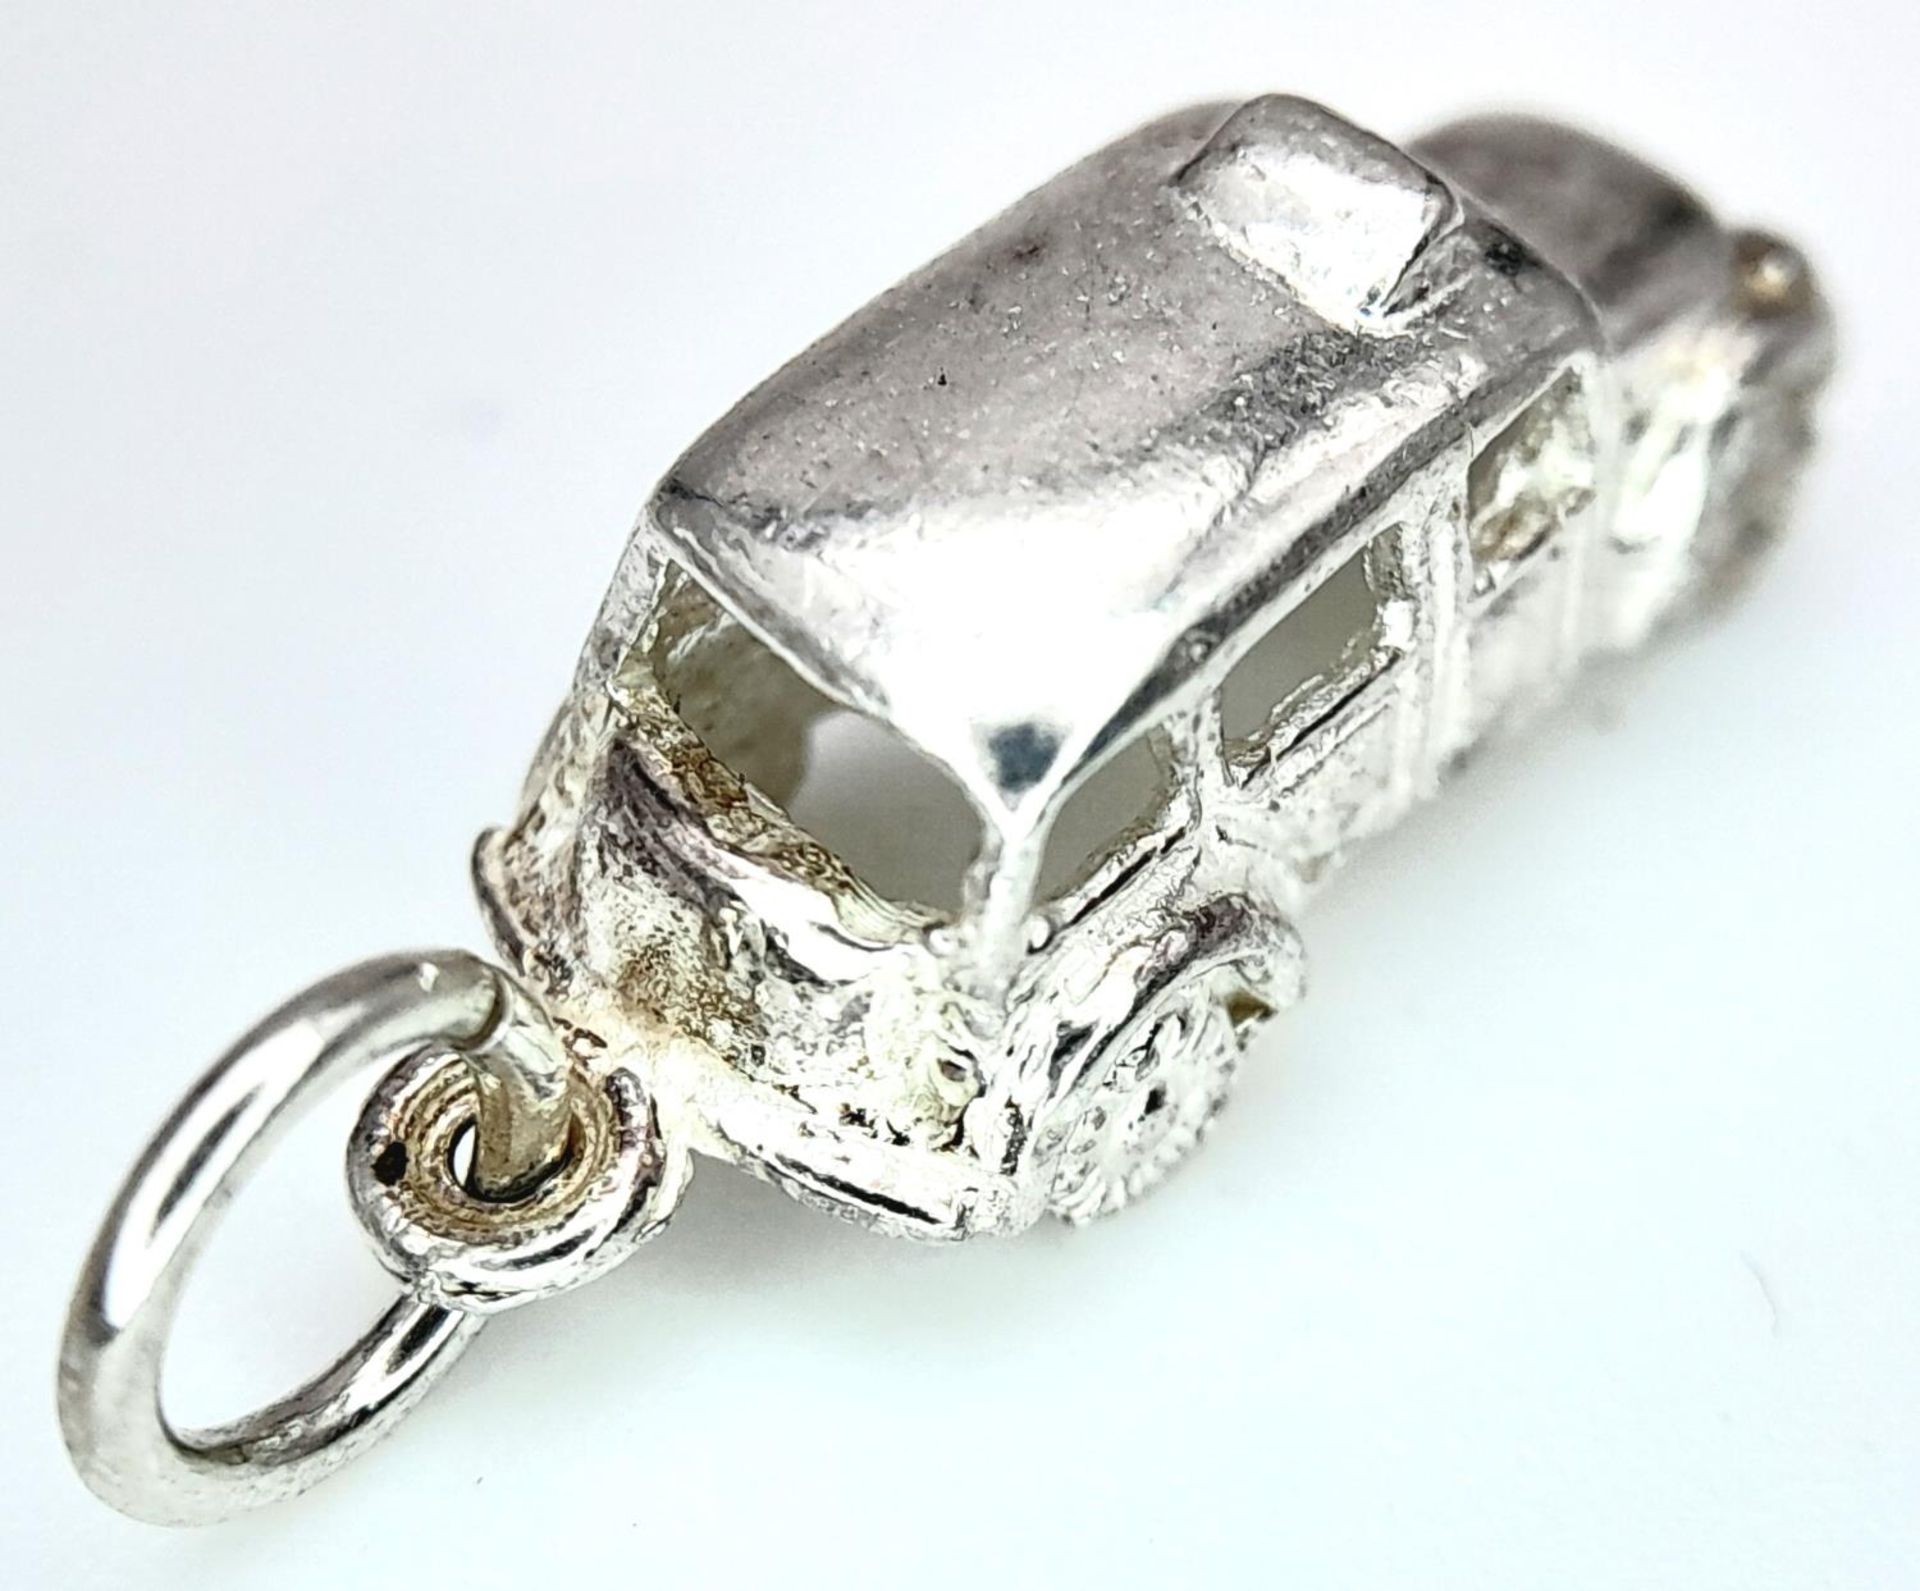 A STERLING SILVER VINTAGE LONDON TAXI CHARM 1.8G , 21mm x 8mm. SC 9092 - Image 2 of 4